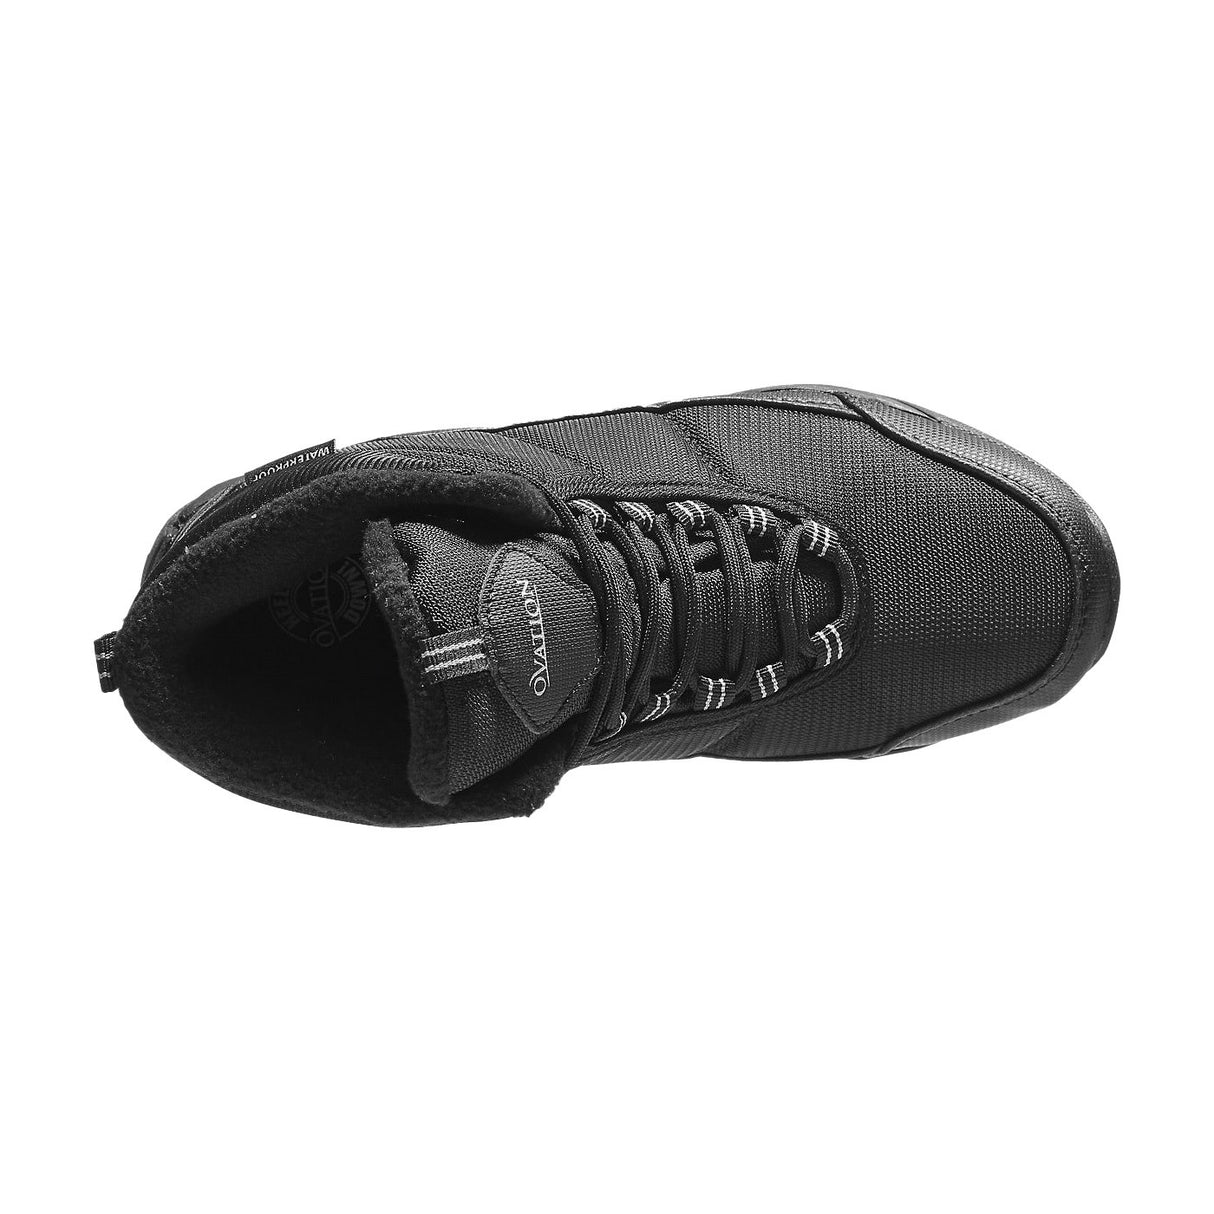 Ovation Heels Down Riding Sneakers